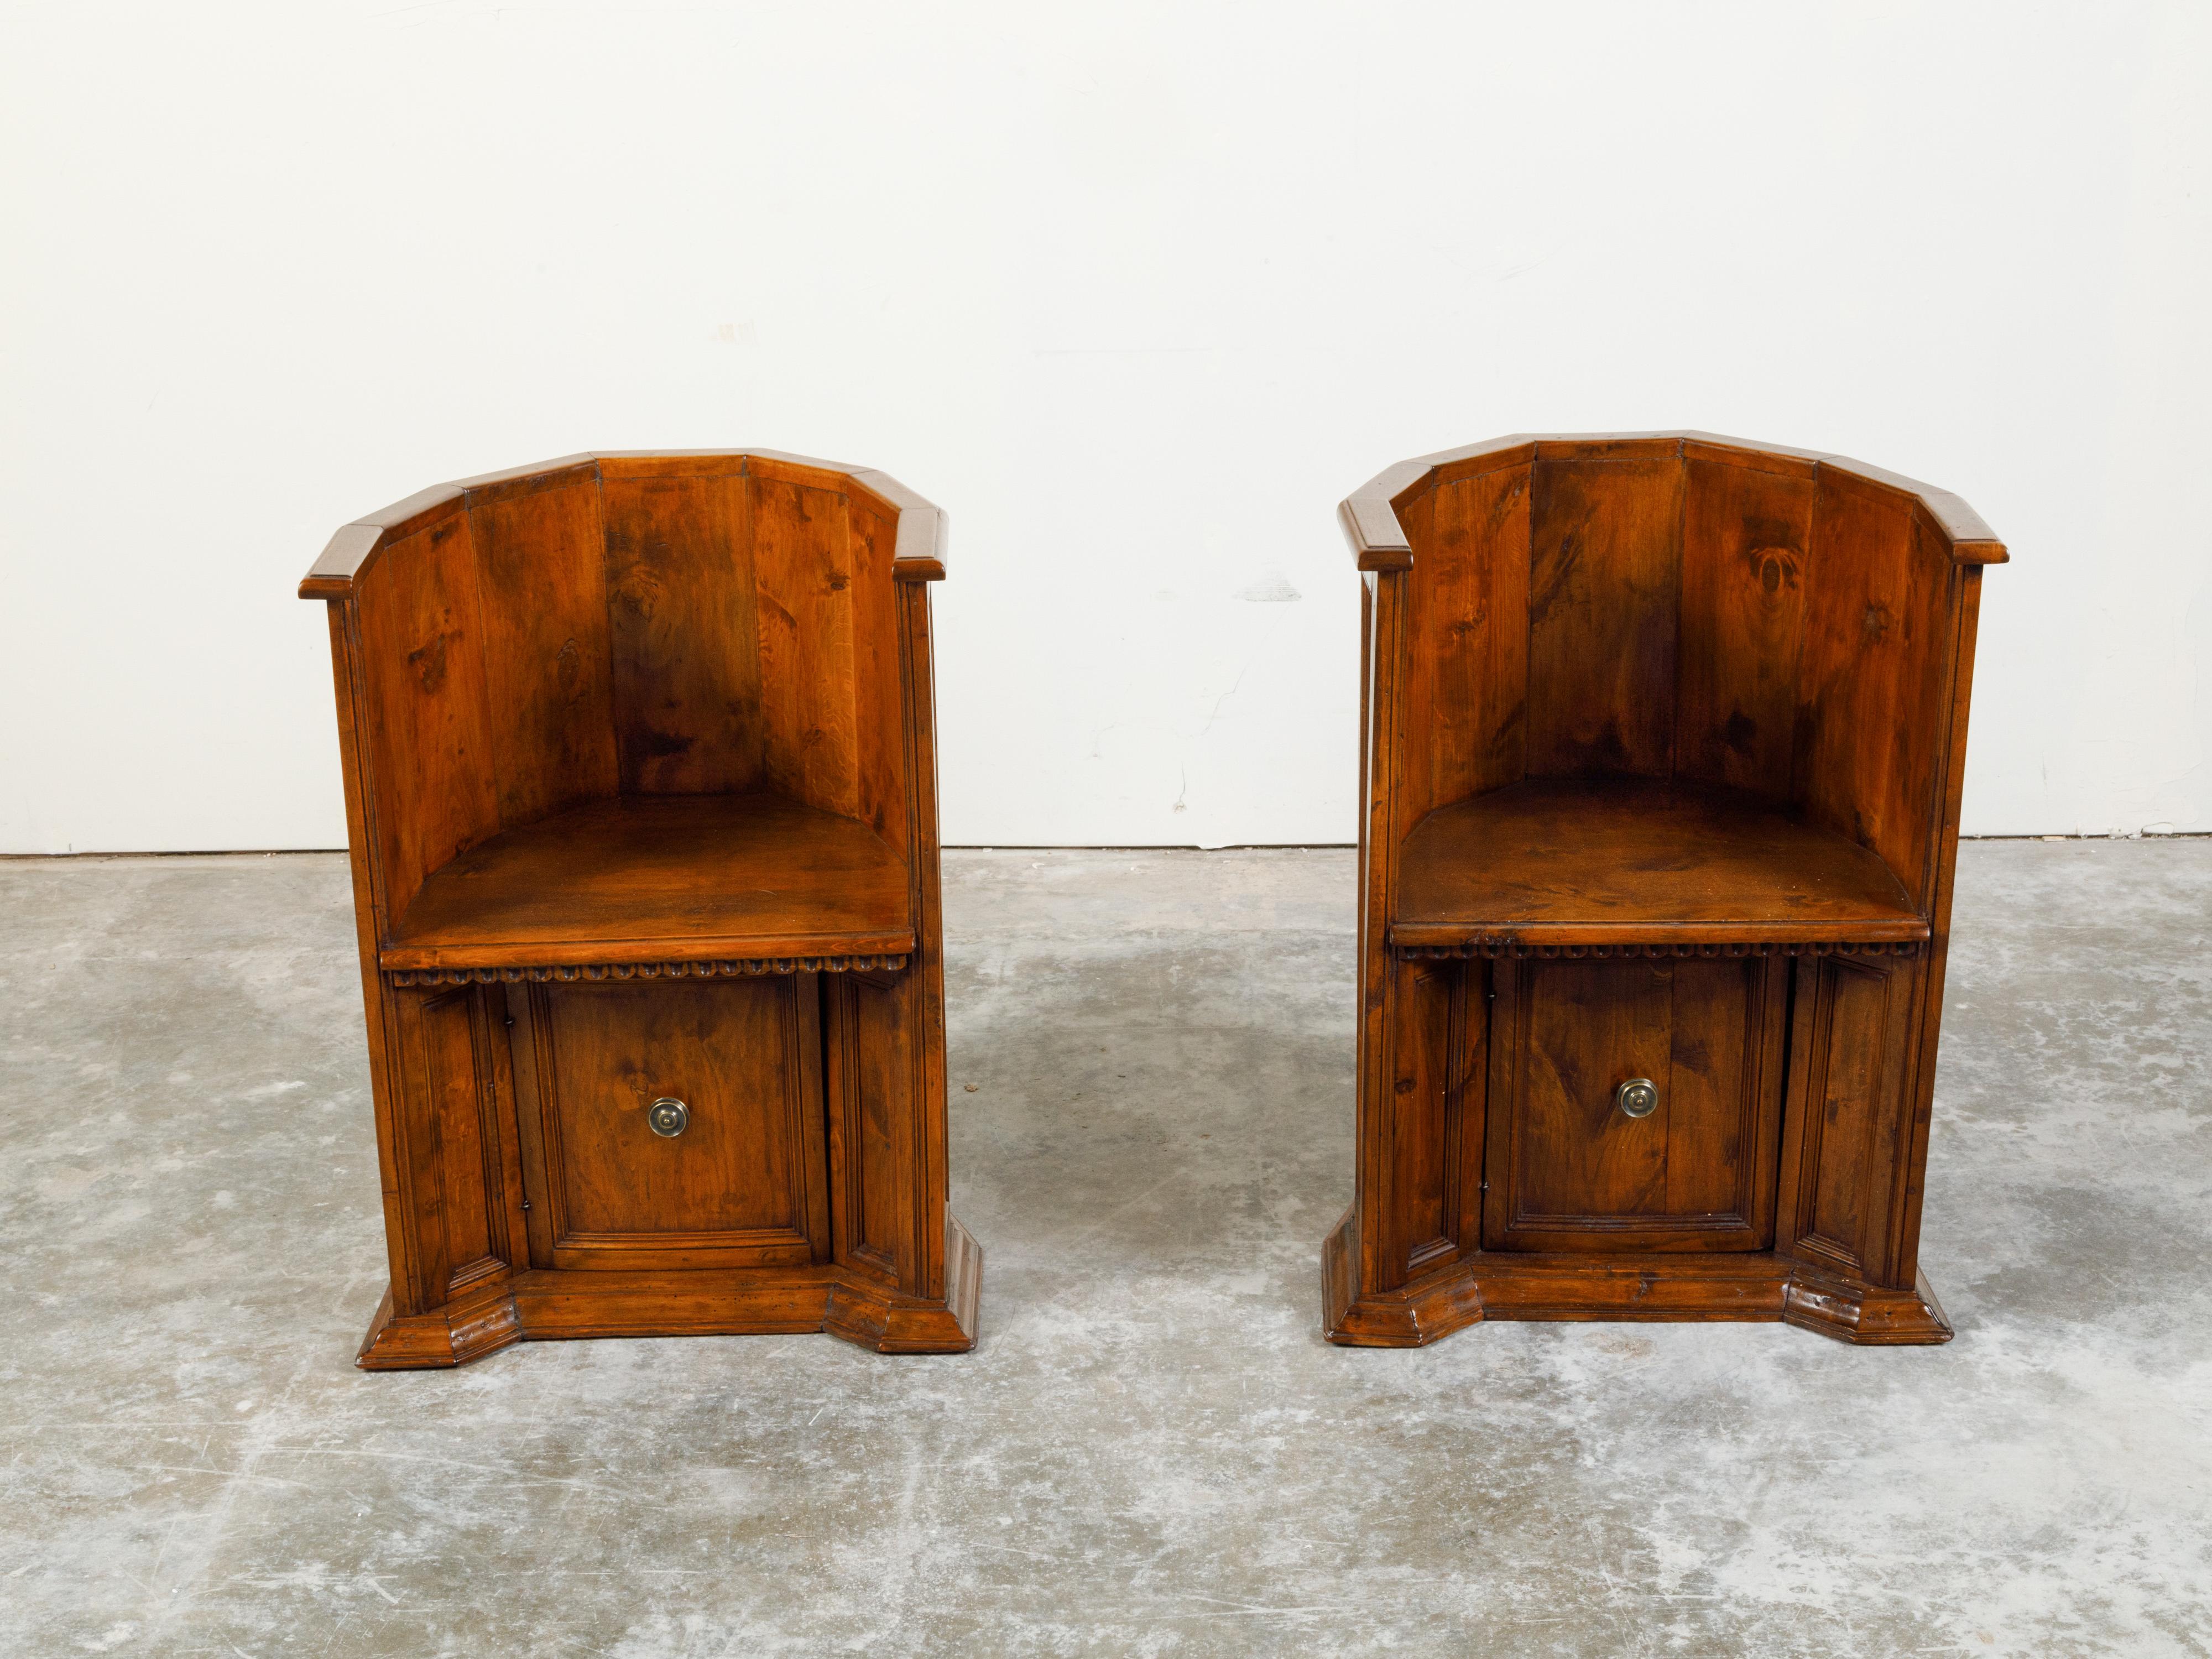 A pair of Italian Renaissance style wooden chairs from the 19th century, with solid wraparound backs, scoop motifs and lower doors. Created in Italy during the 19th century, each of this pair of chairs brings us back to Renaissance times and